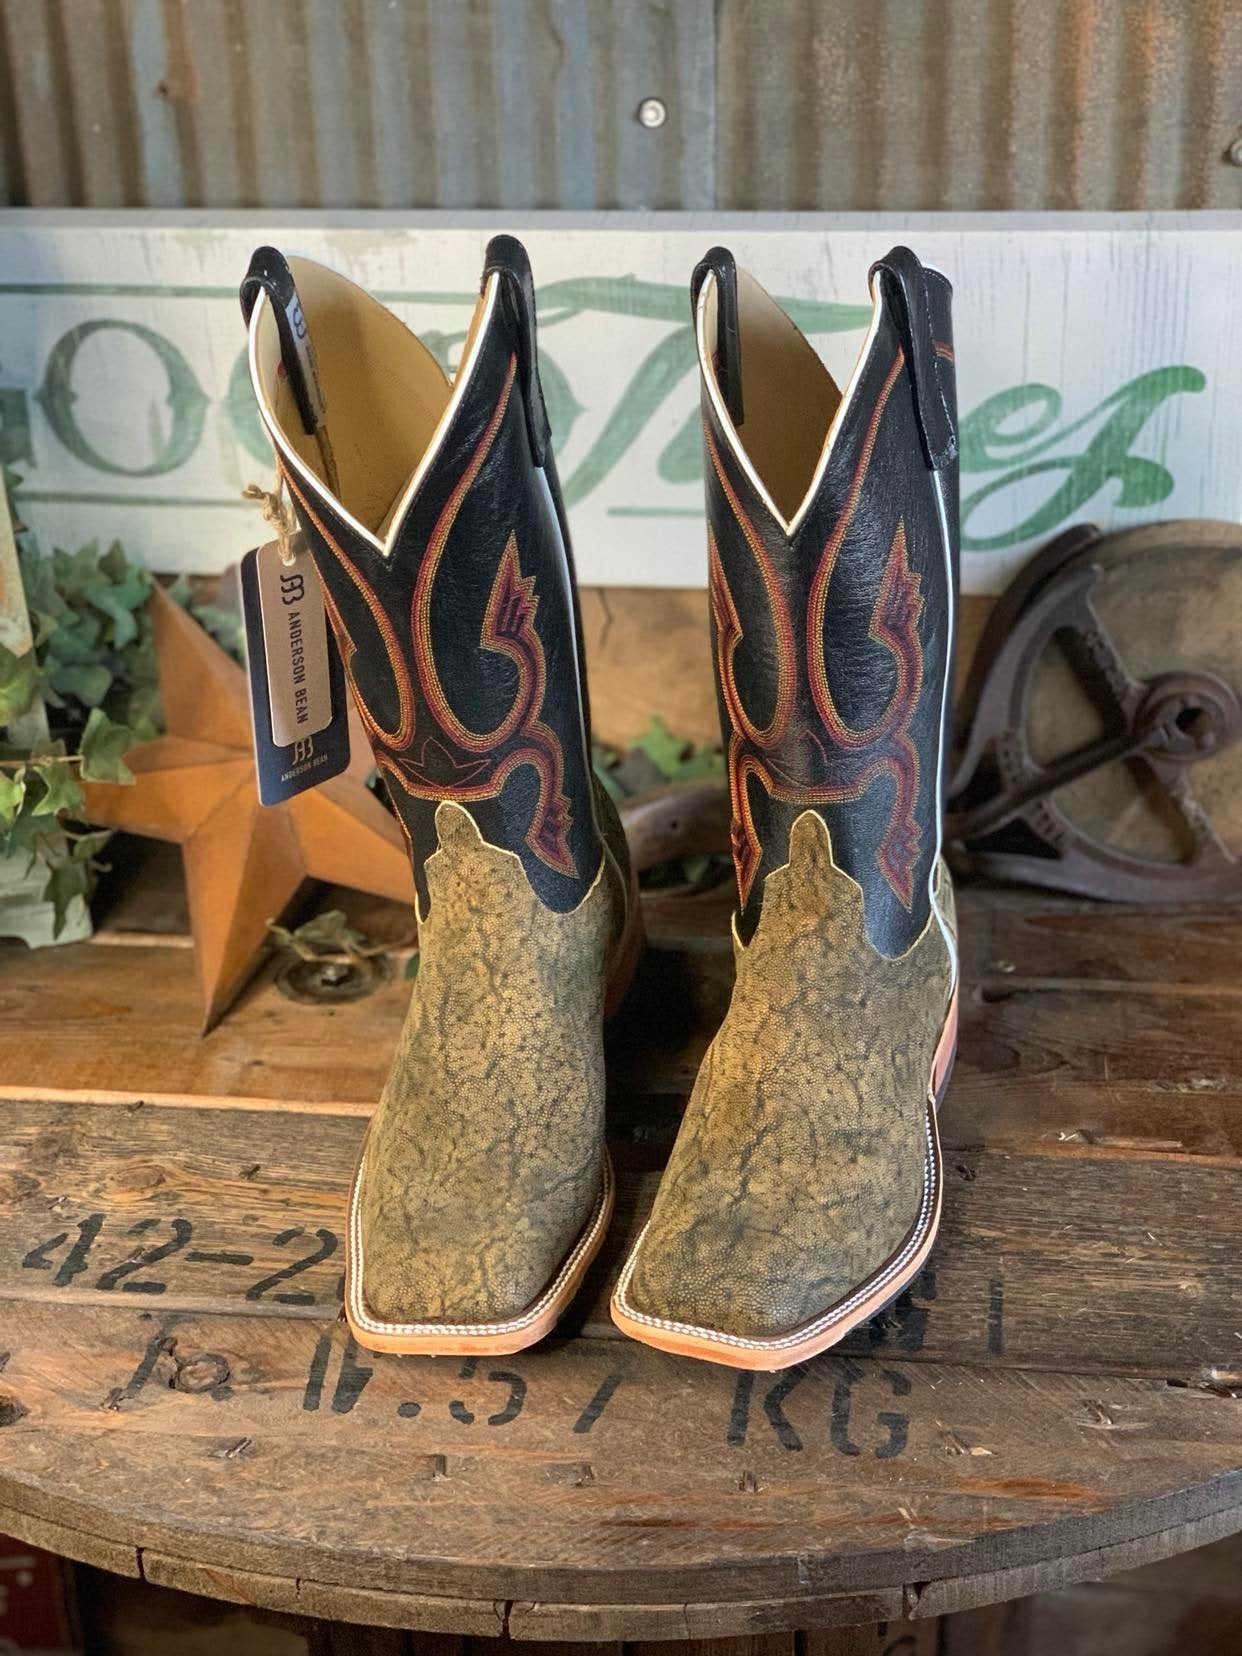 AB Antique Saddle Safari Elephant and Black Kidskin Boot-Men's Boots-Anderson Bean-Lucky J Boots & More, Women's, Men's, & Kids Western Store Located in Carthage, MO